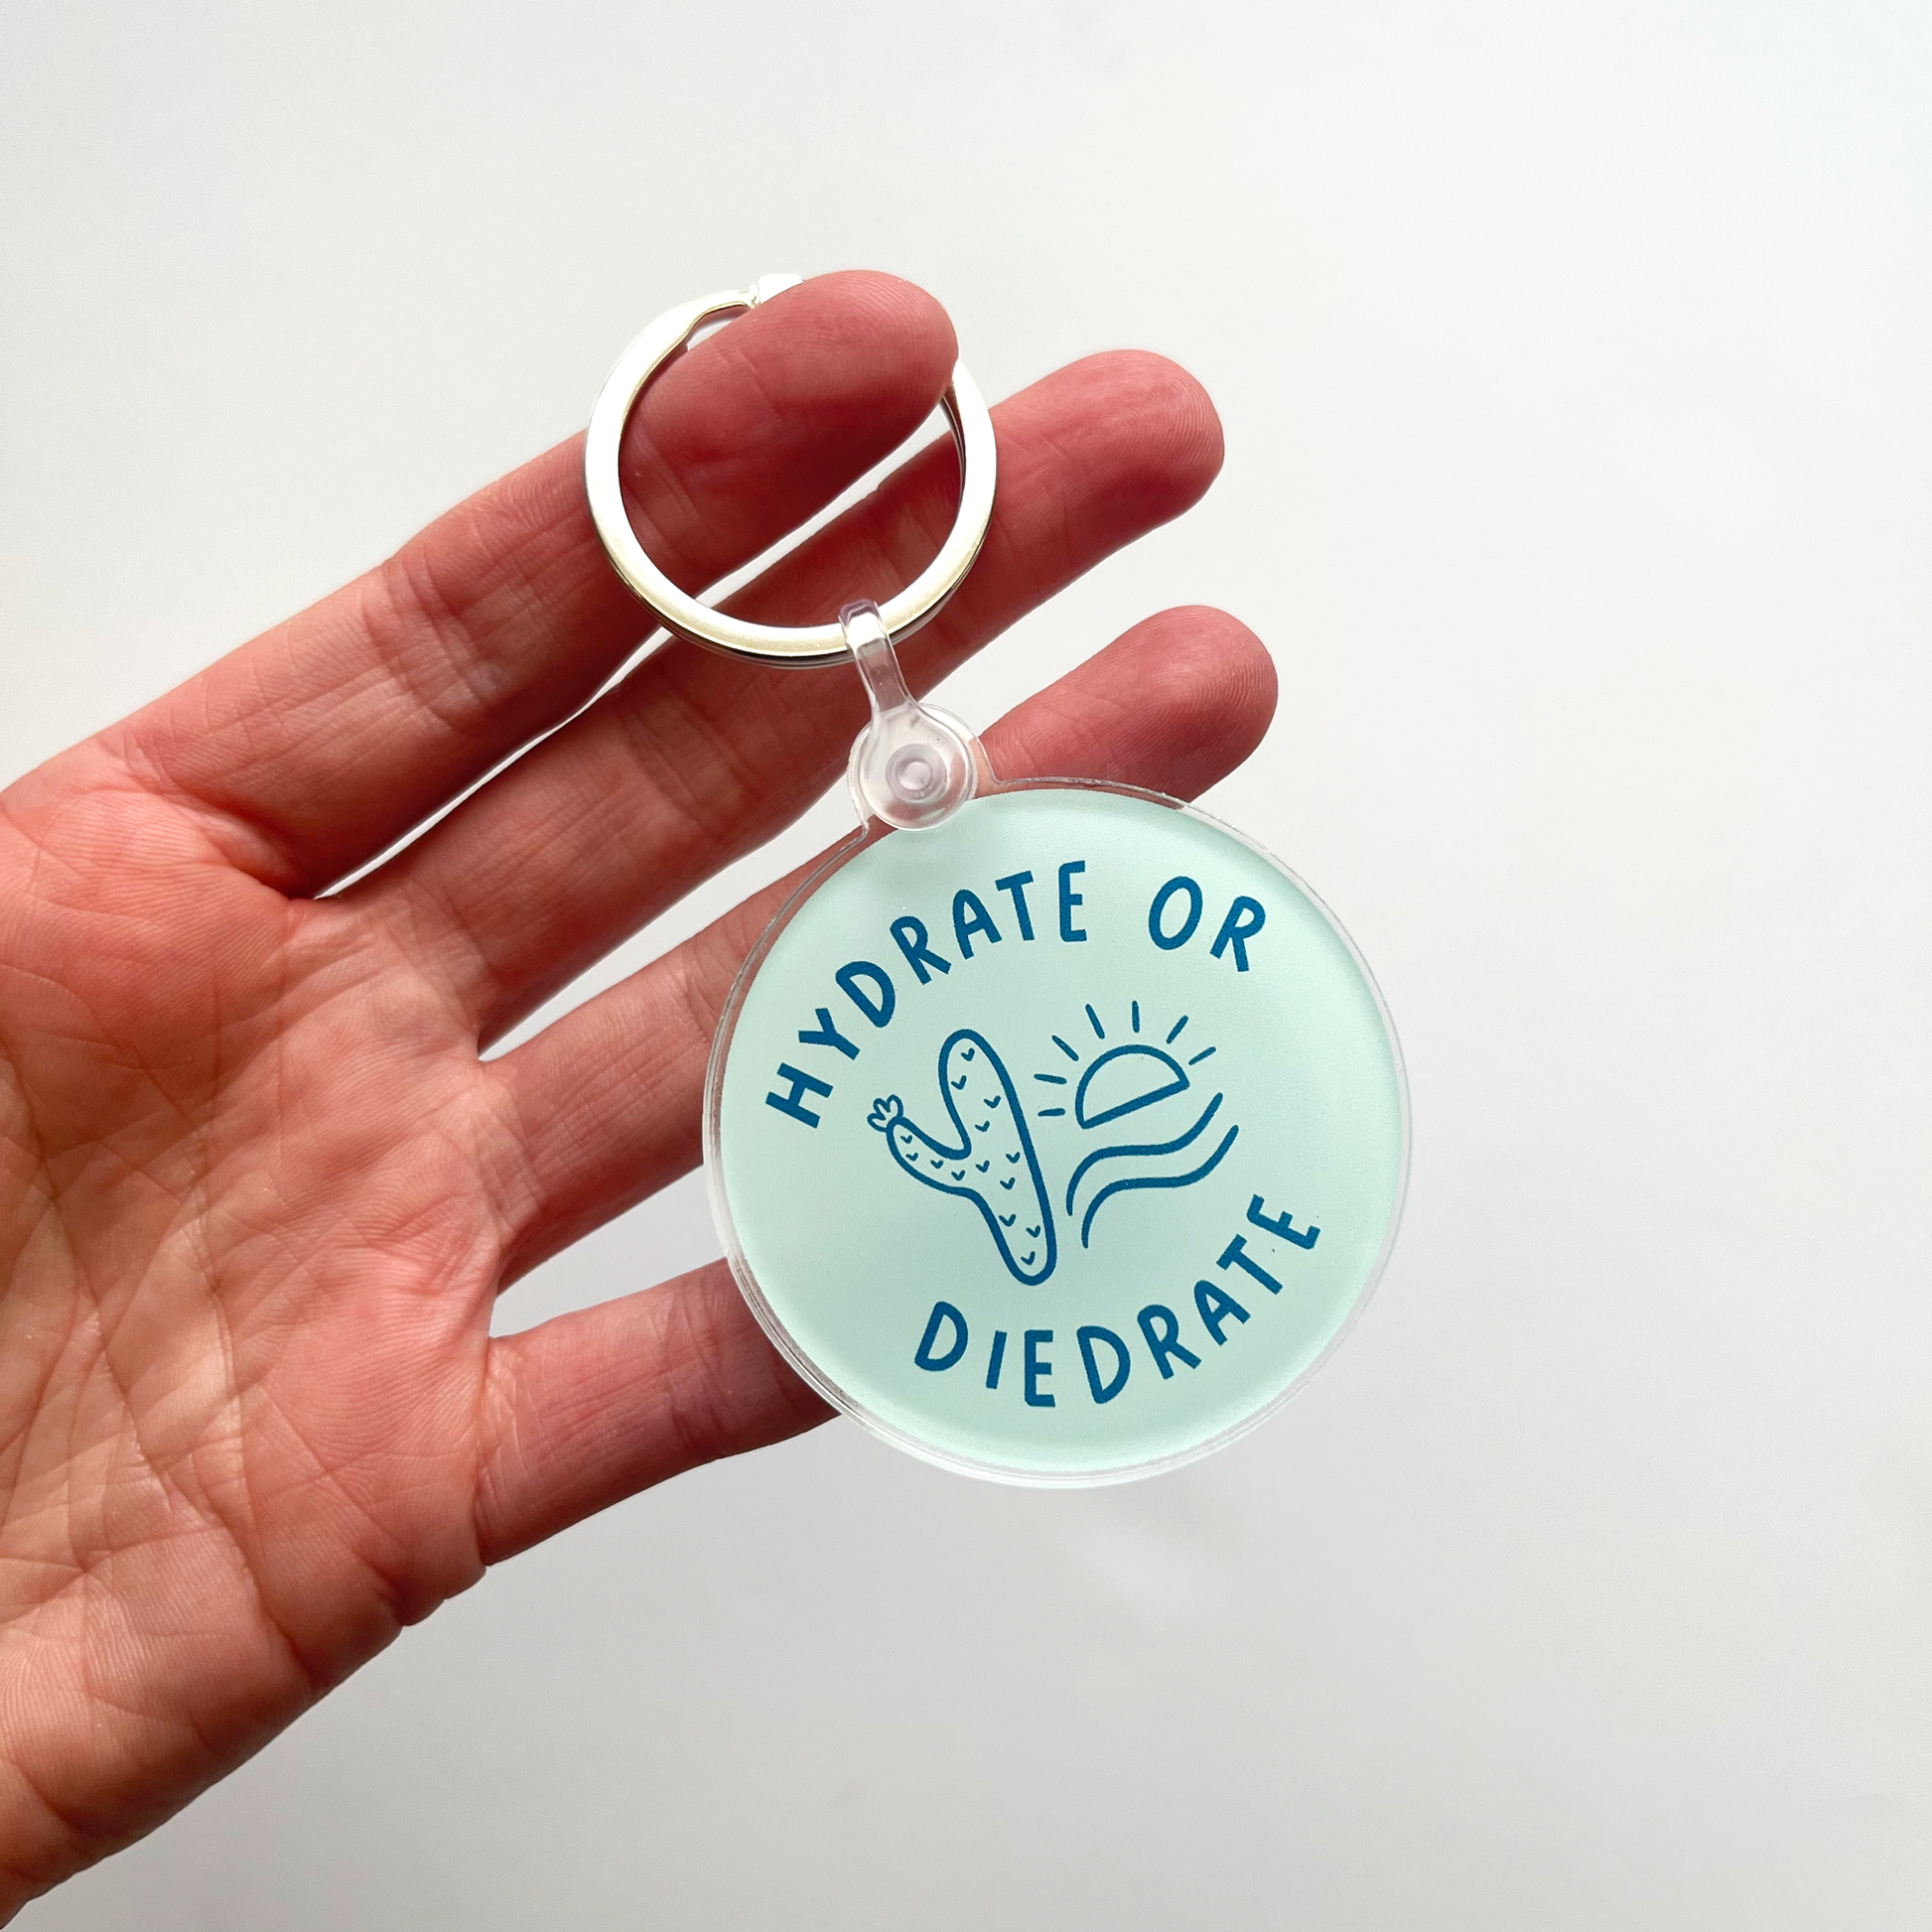 blue circle keychain with dark blue text saying hydrate or diedrate. Cactus and a sun are doodled in the middle of the circle.